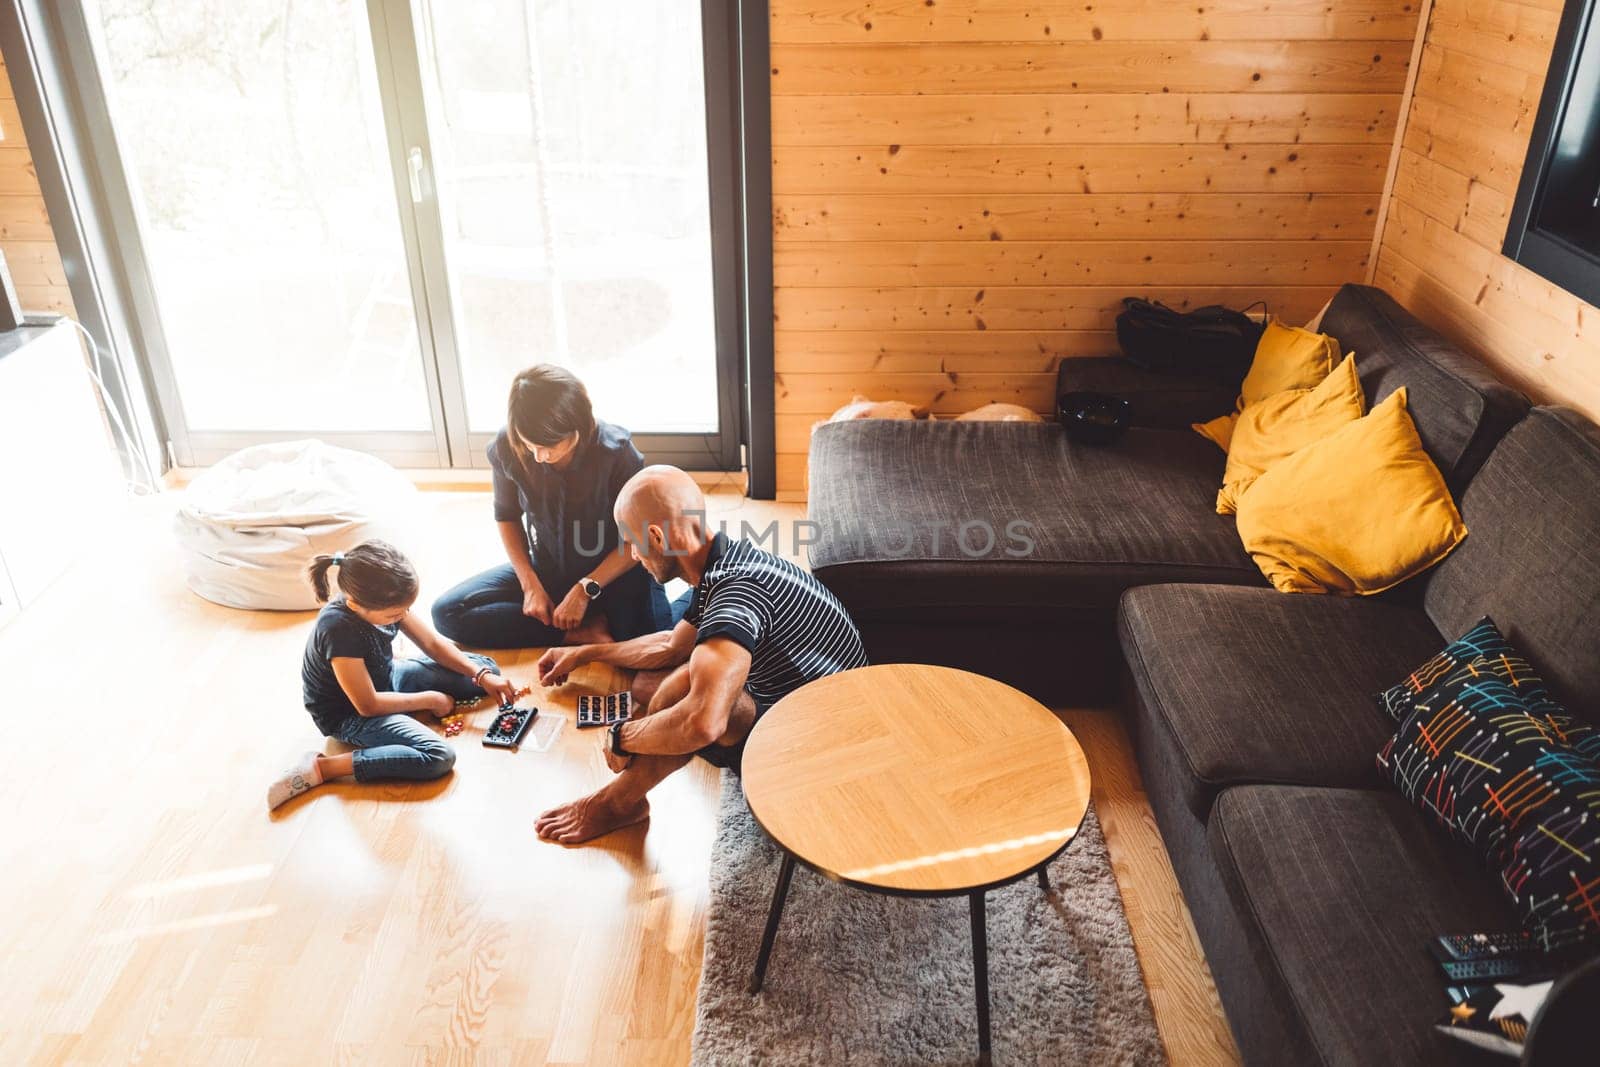 Family of three with young girl playing games on the floor in the living room, spending time together over the weekend by VisualProductions